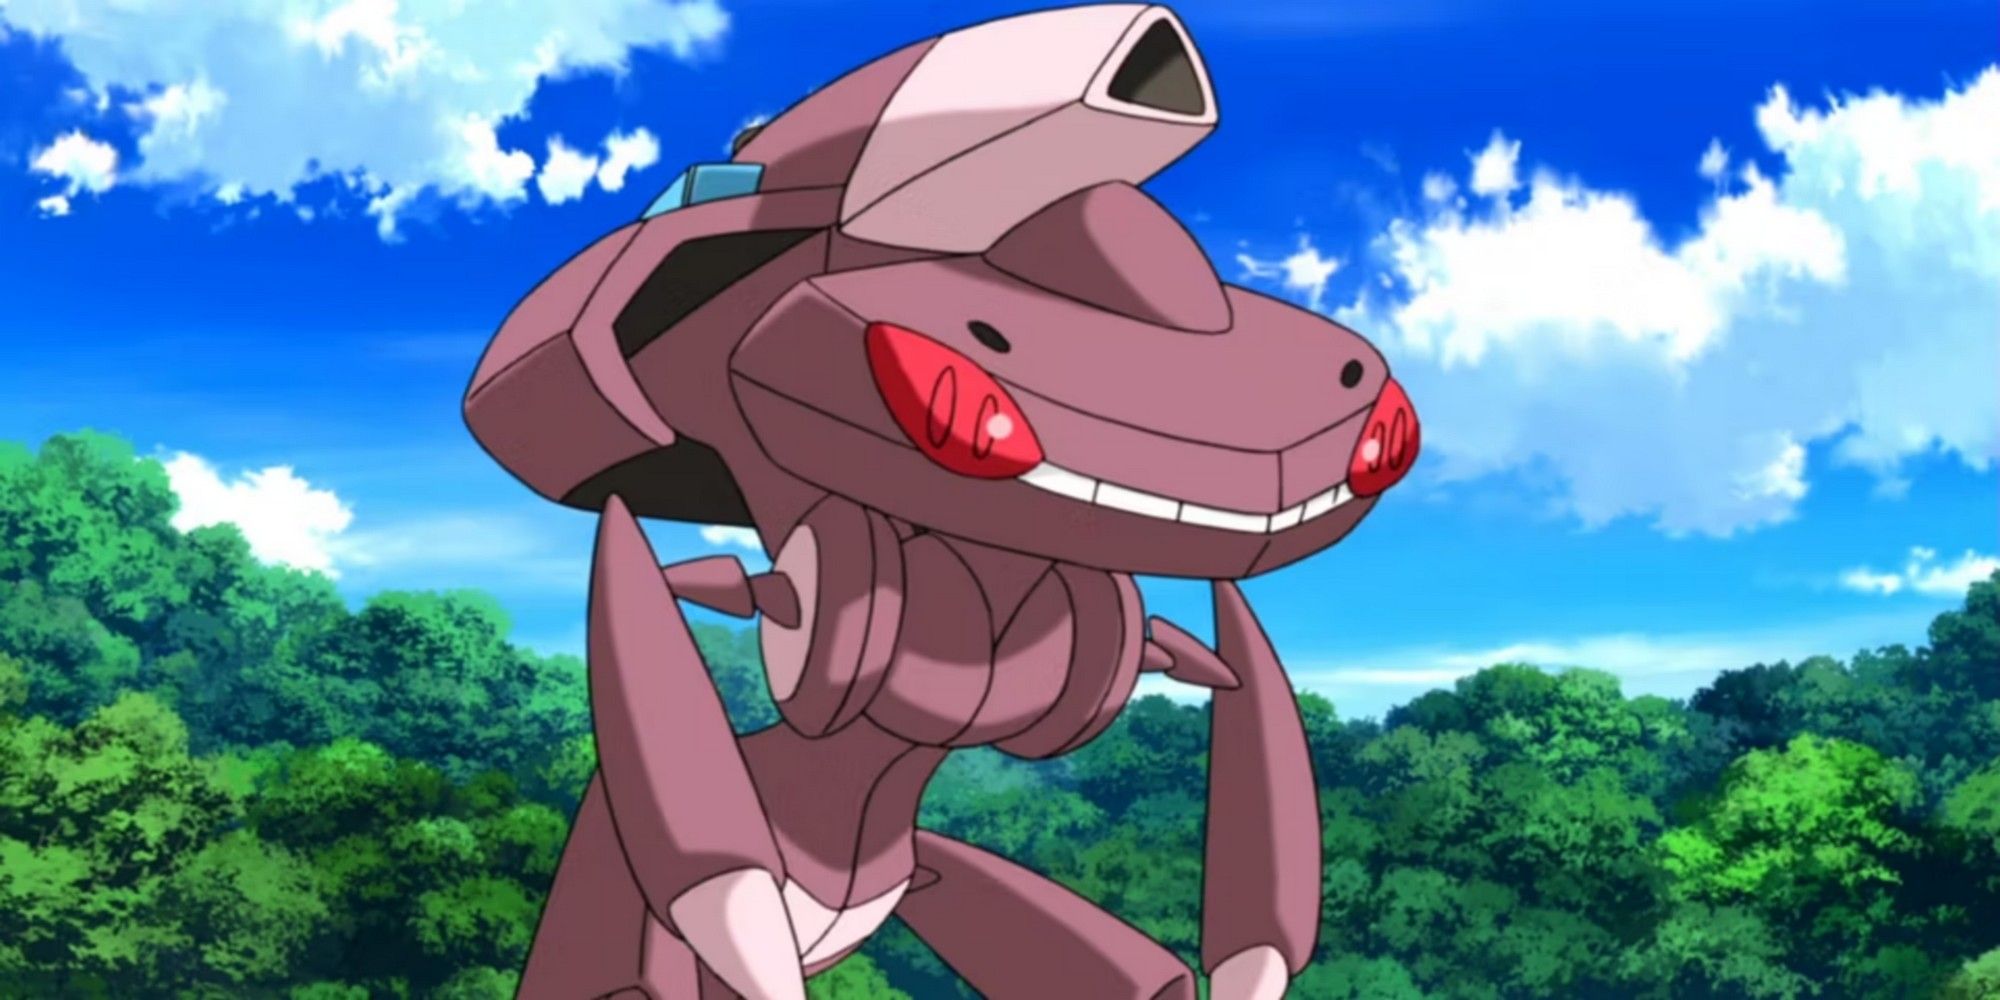 The Pokemon Genesect outside against trees and sky